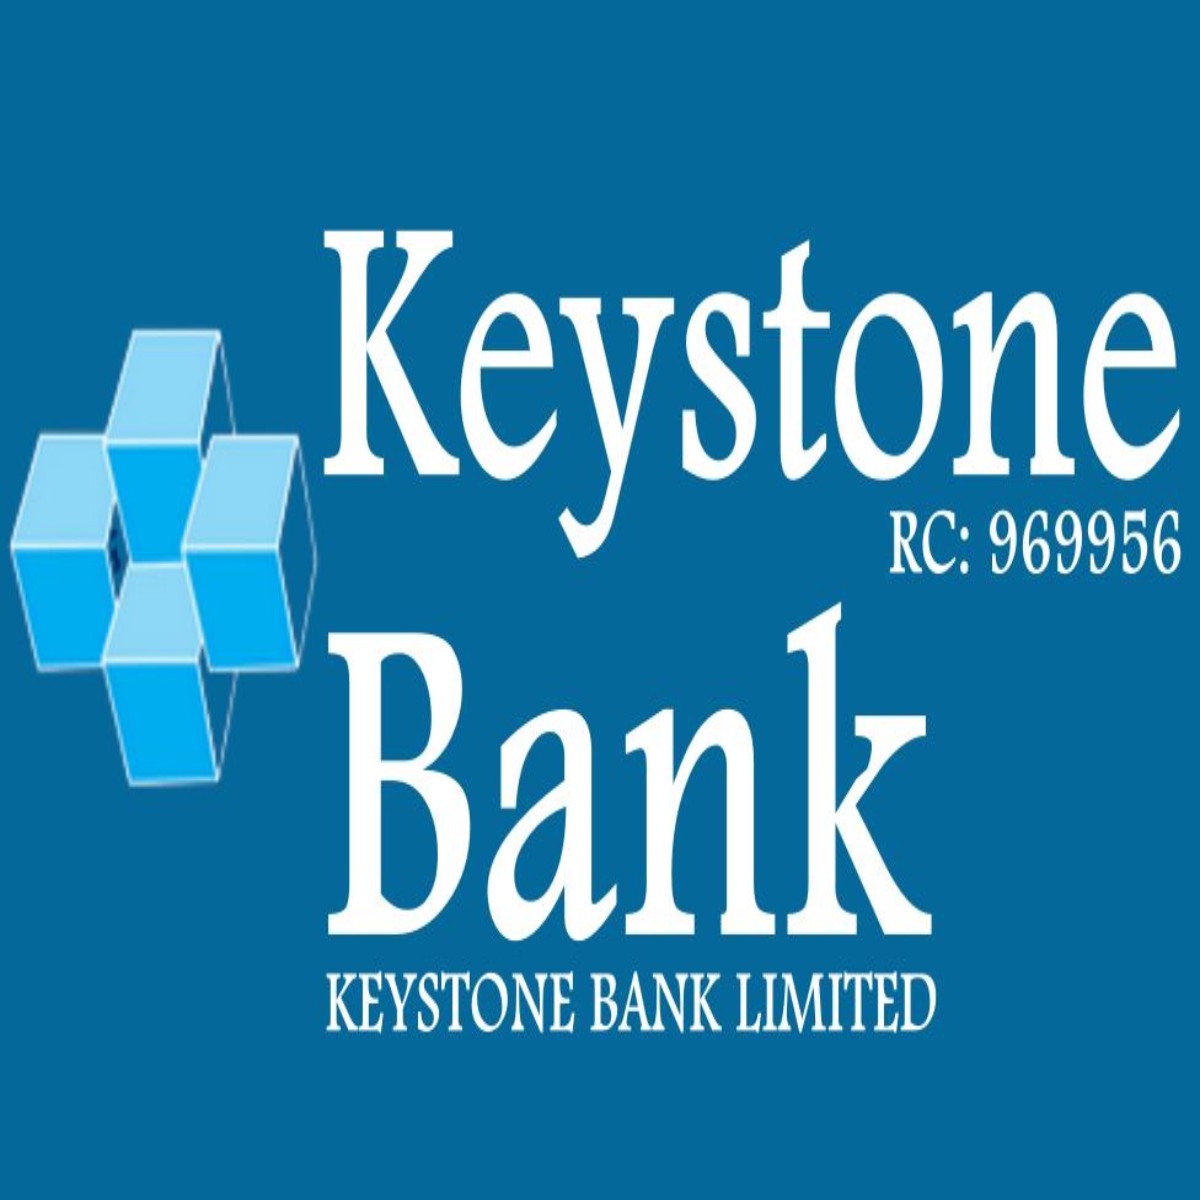 Keystone Bank 2023 Career Opportunities for Young Graduates